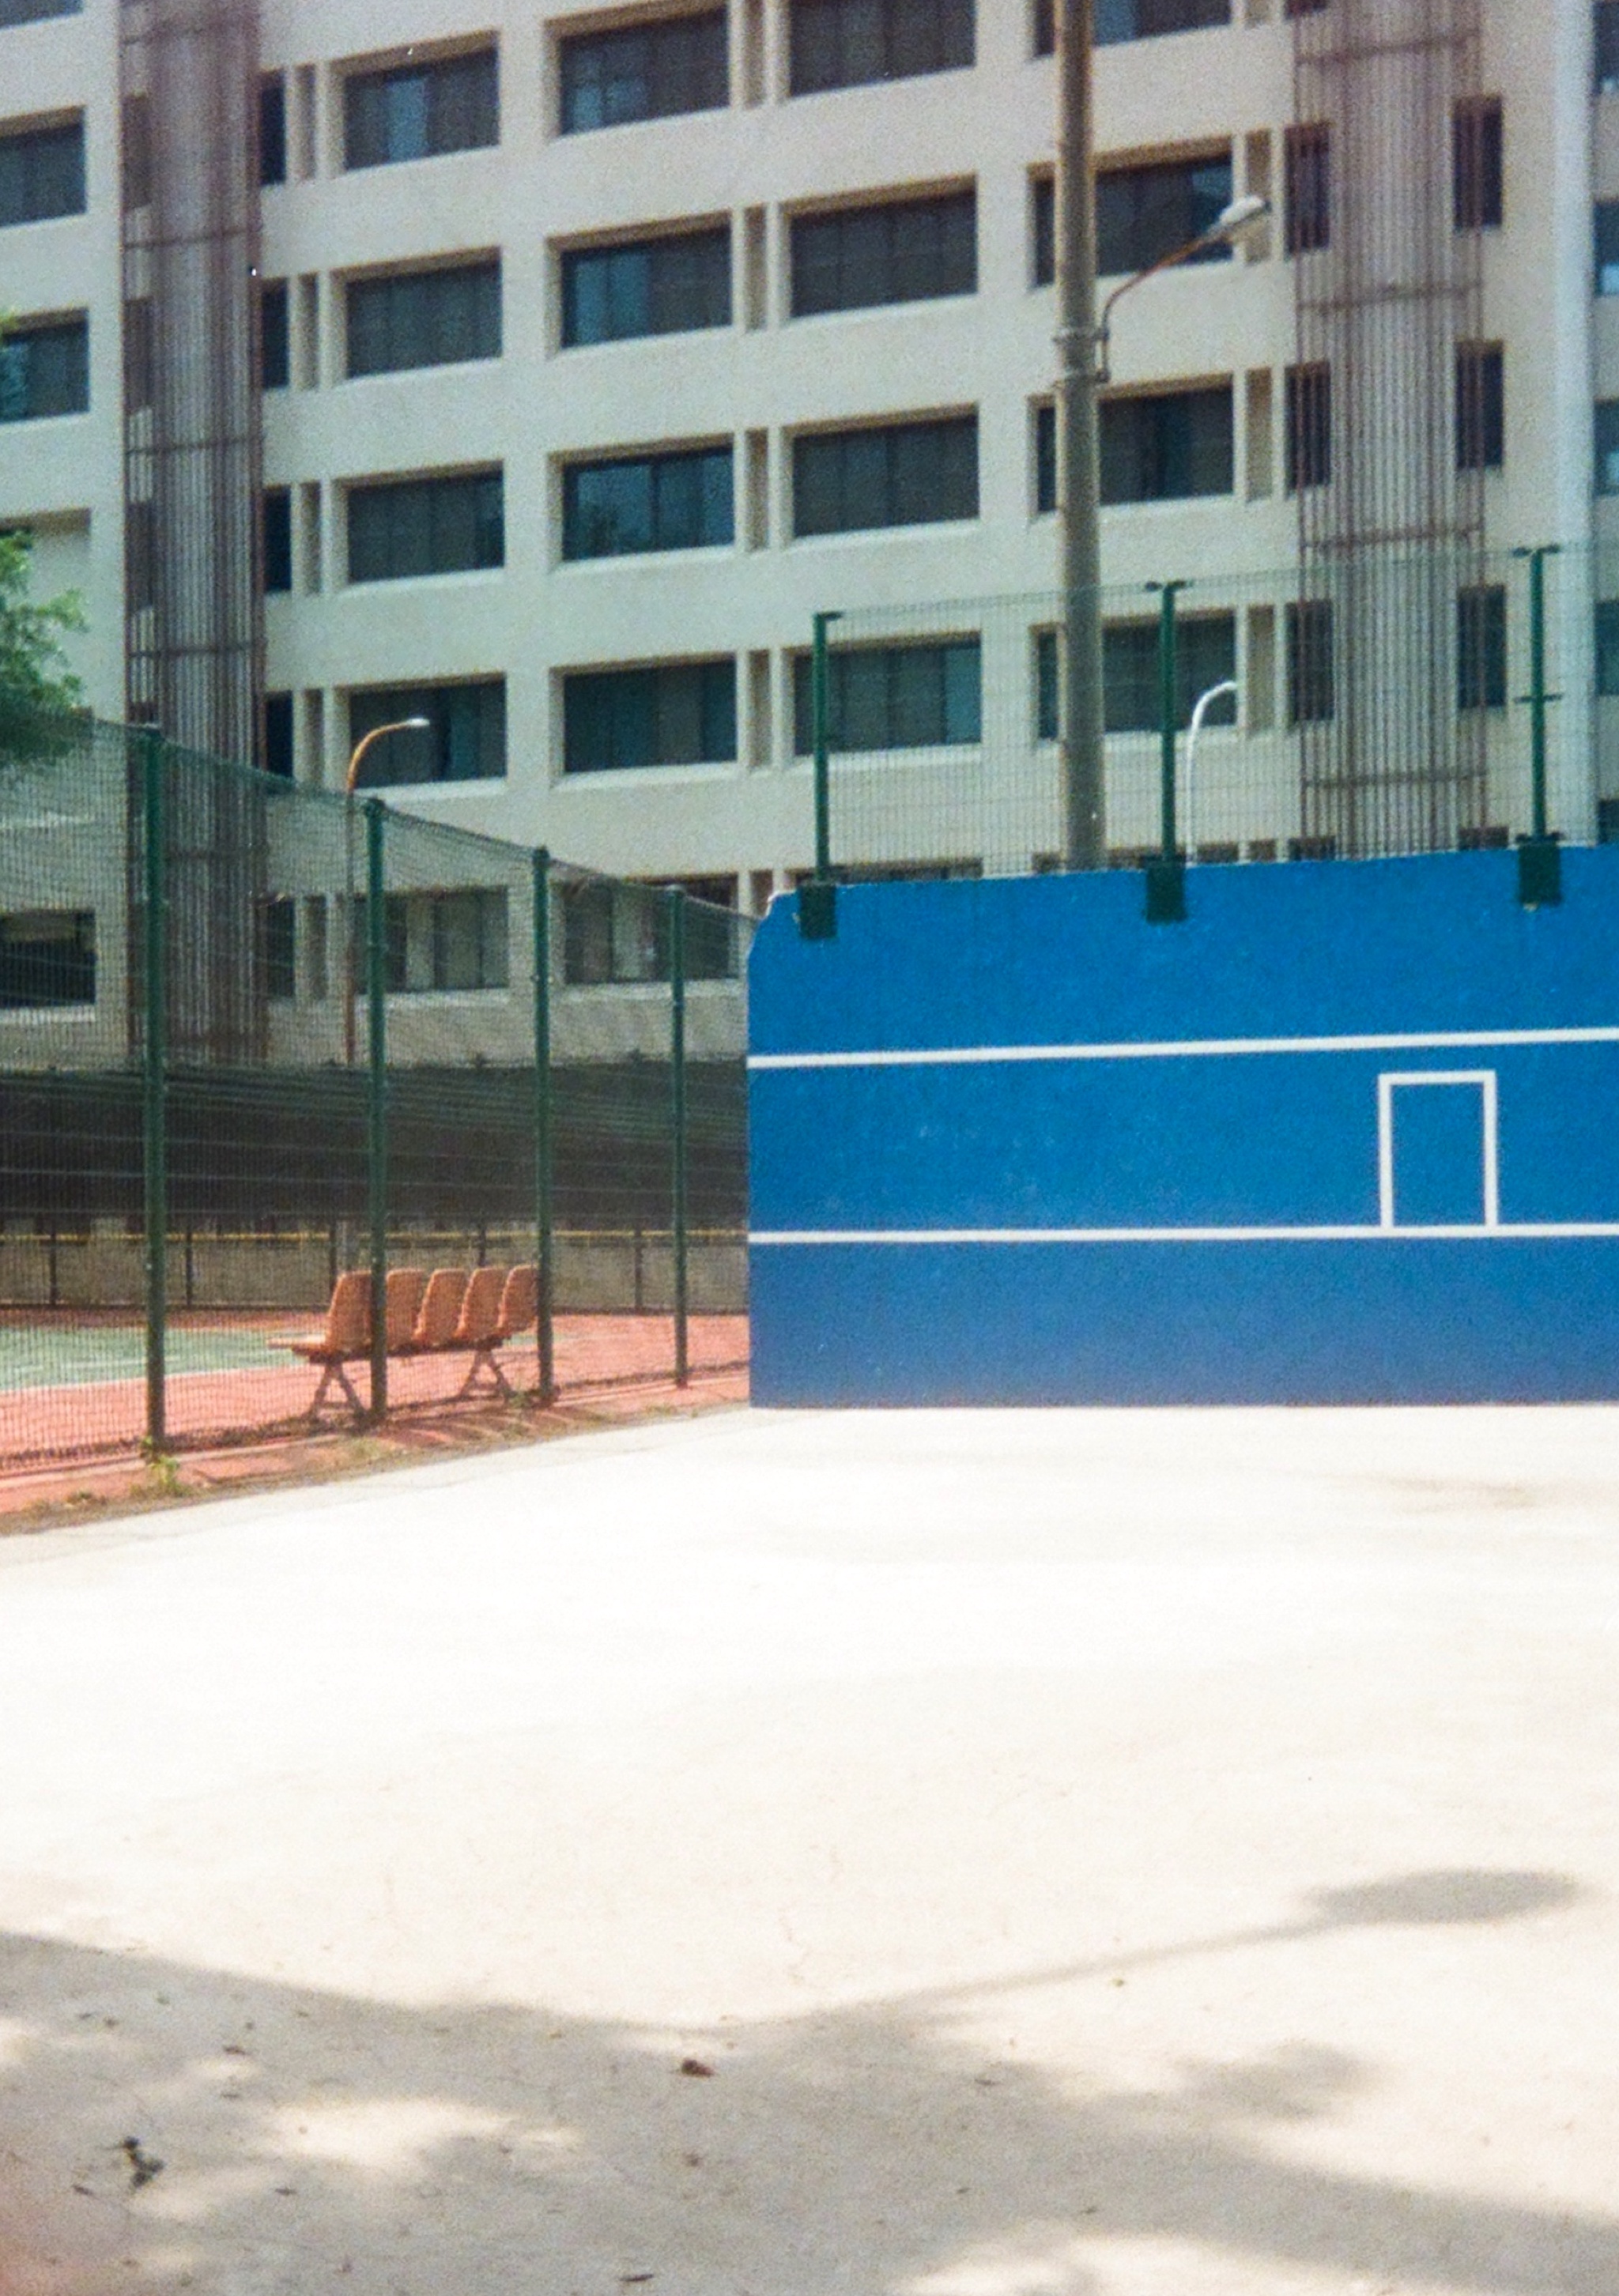 On a sunny day, a bright blue tennis wall, and a tennis court across a fence.